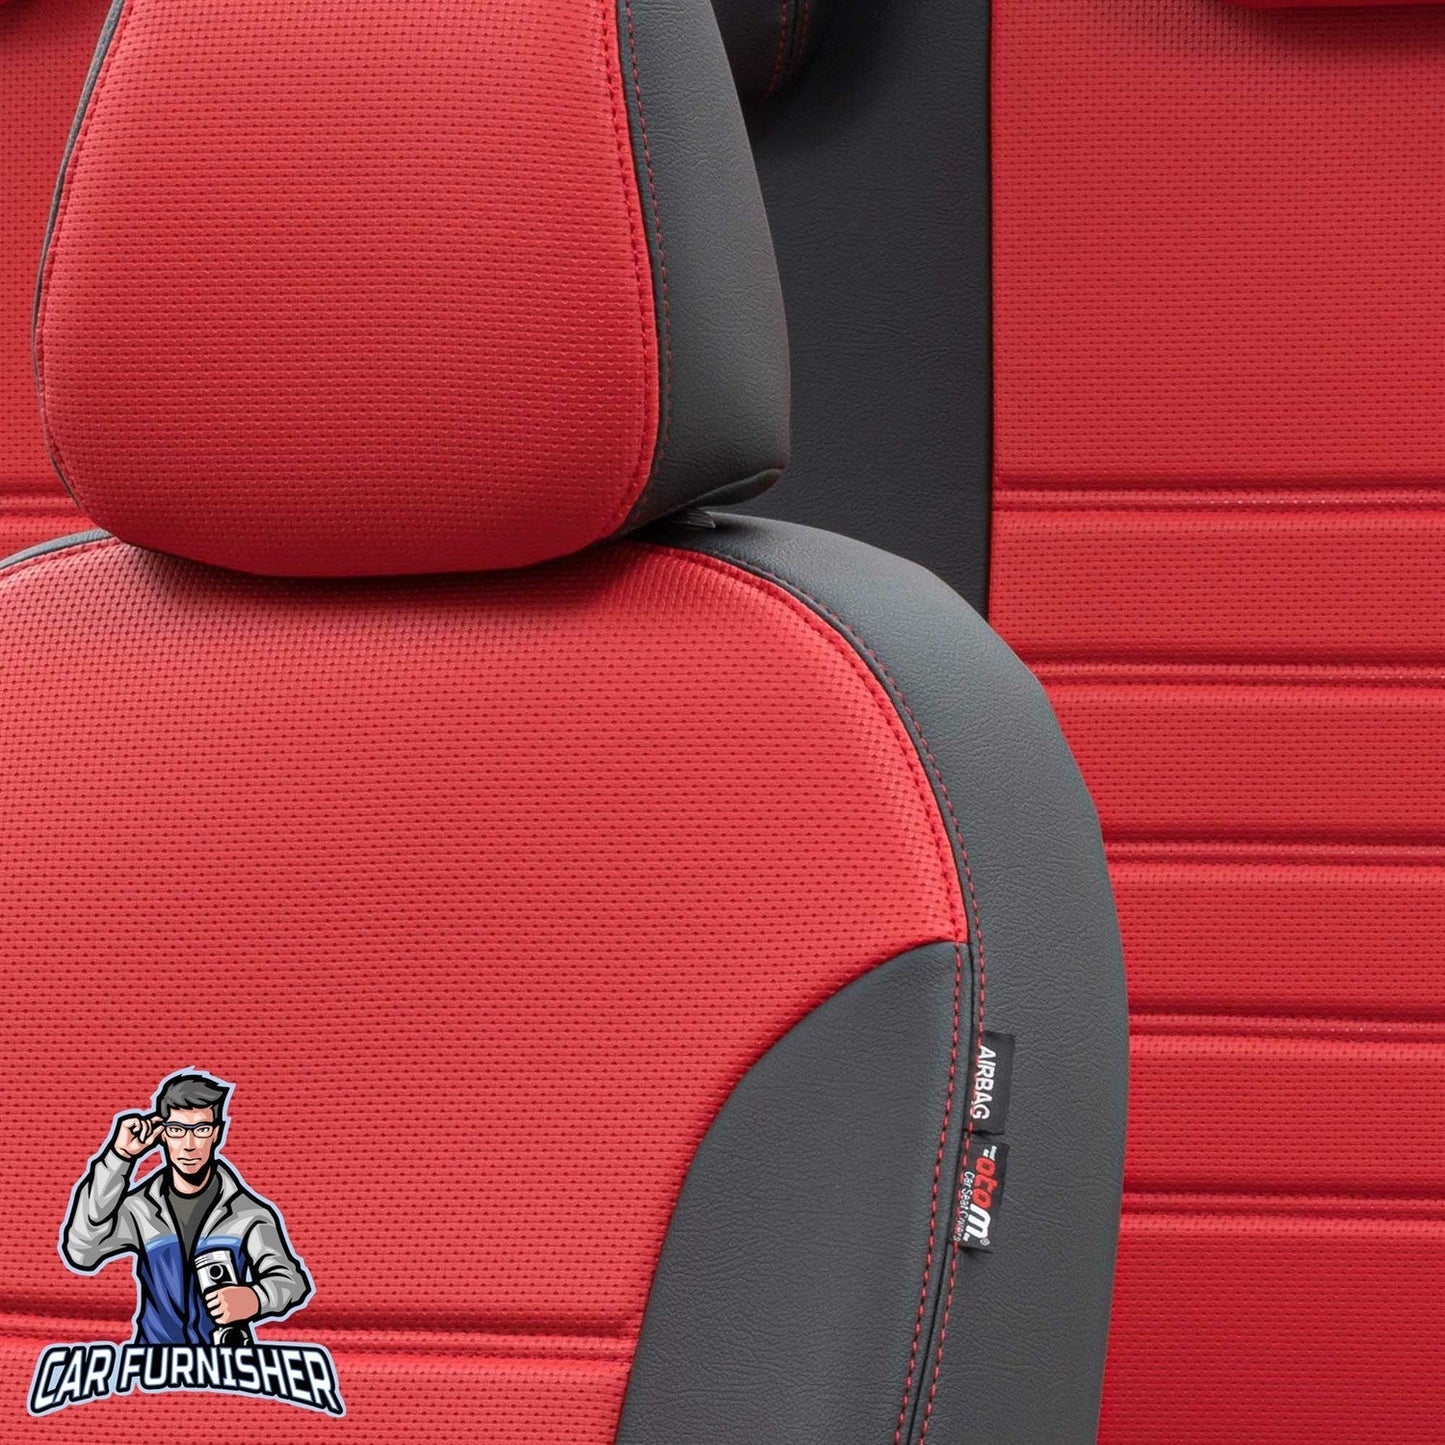 Honda CRV Seat Covers New York Leather Design Red Leather